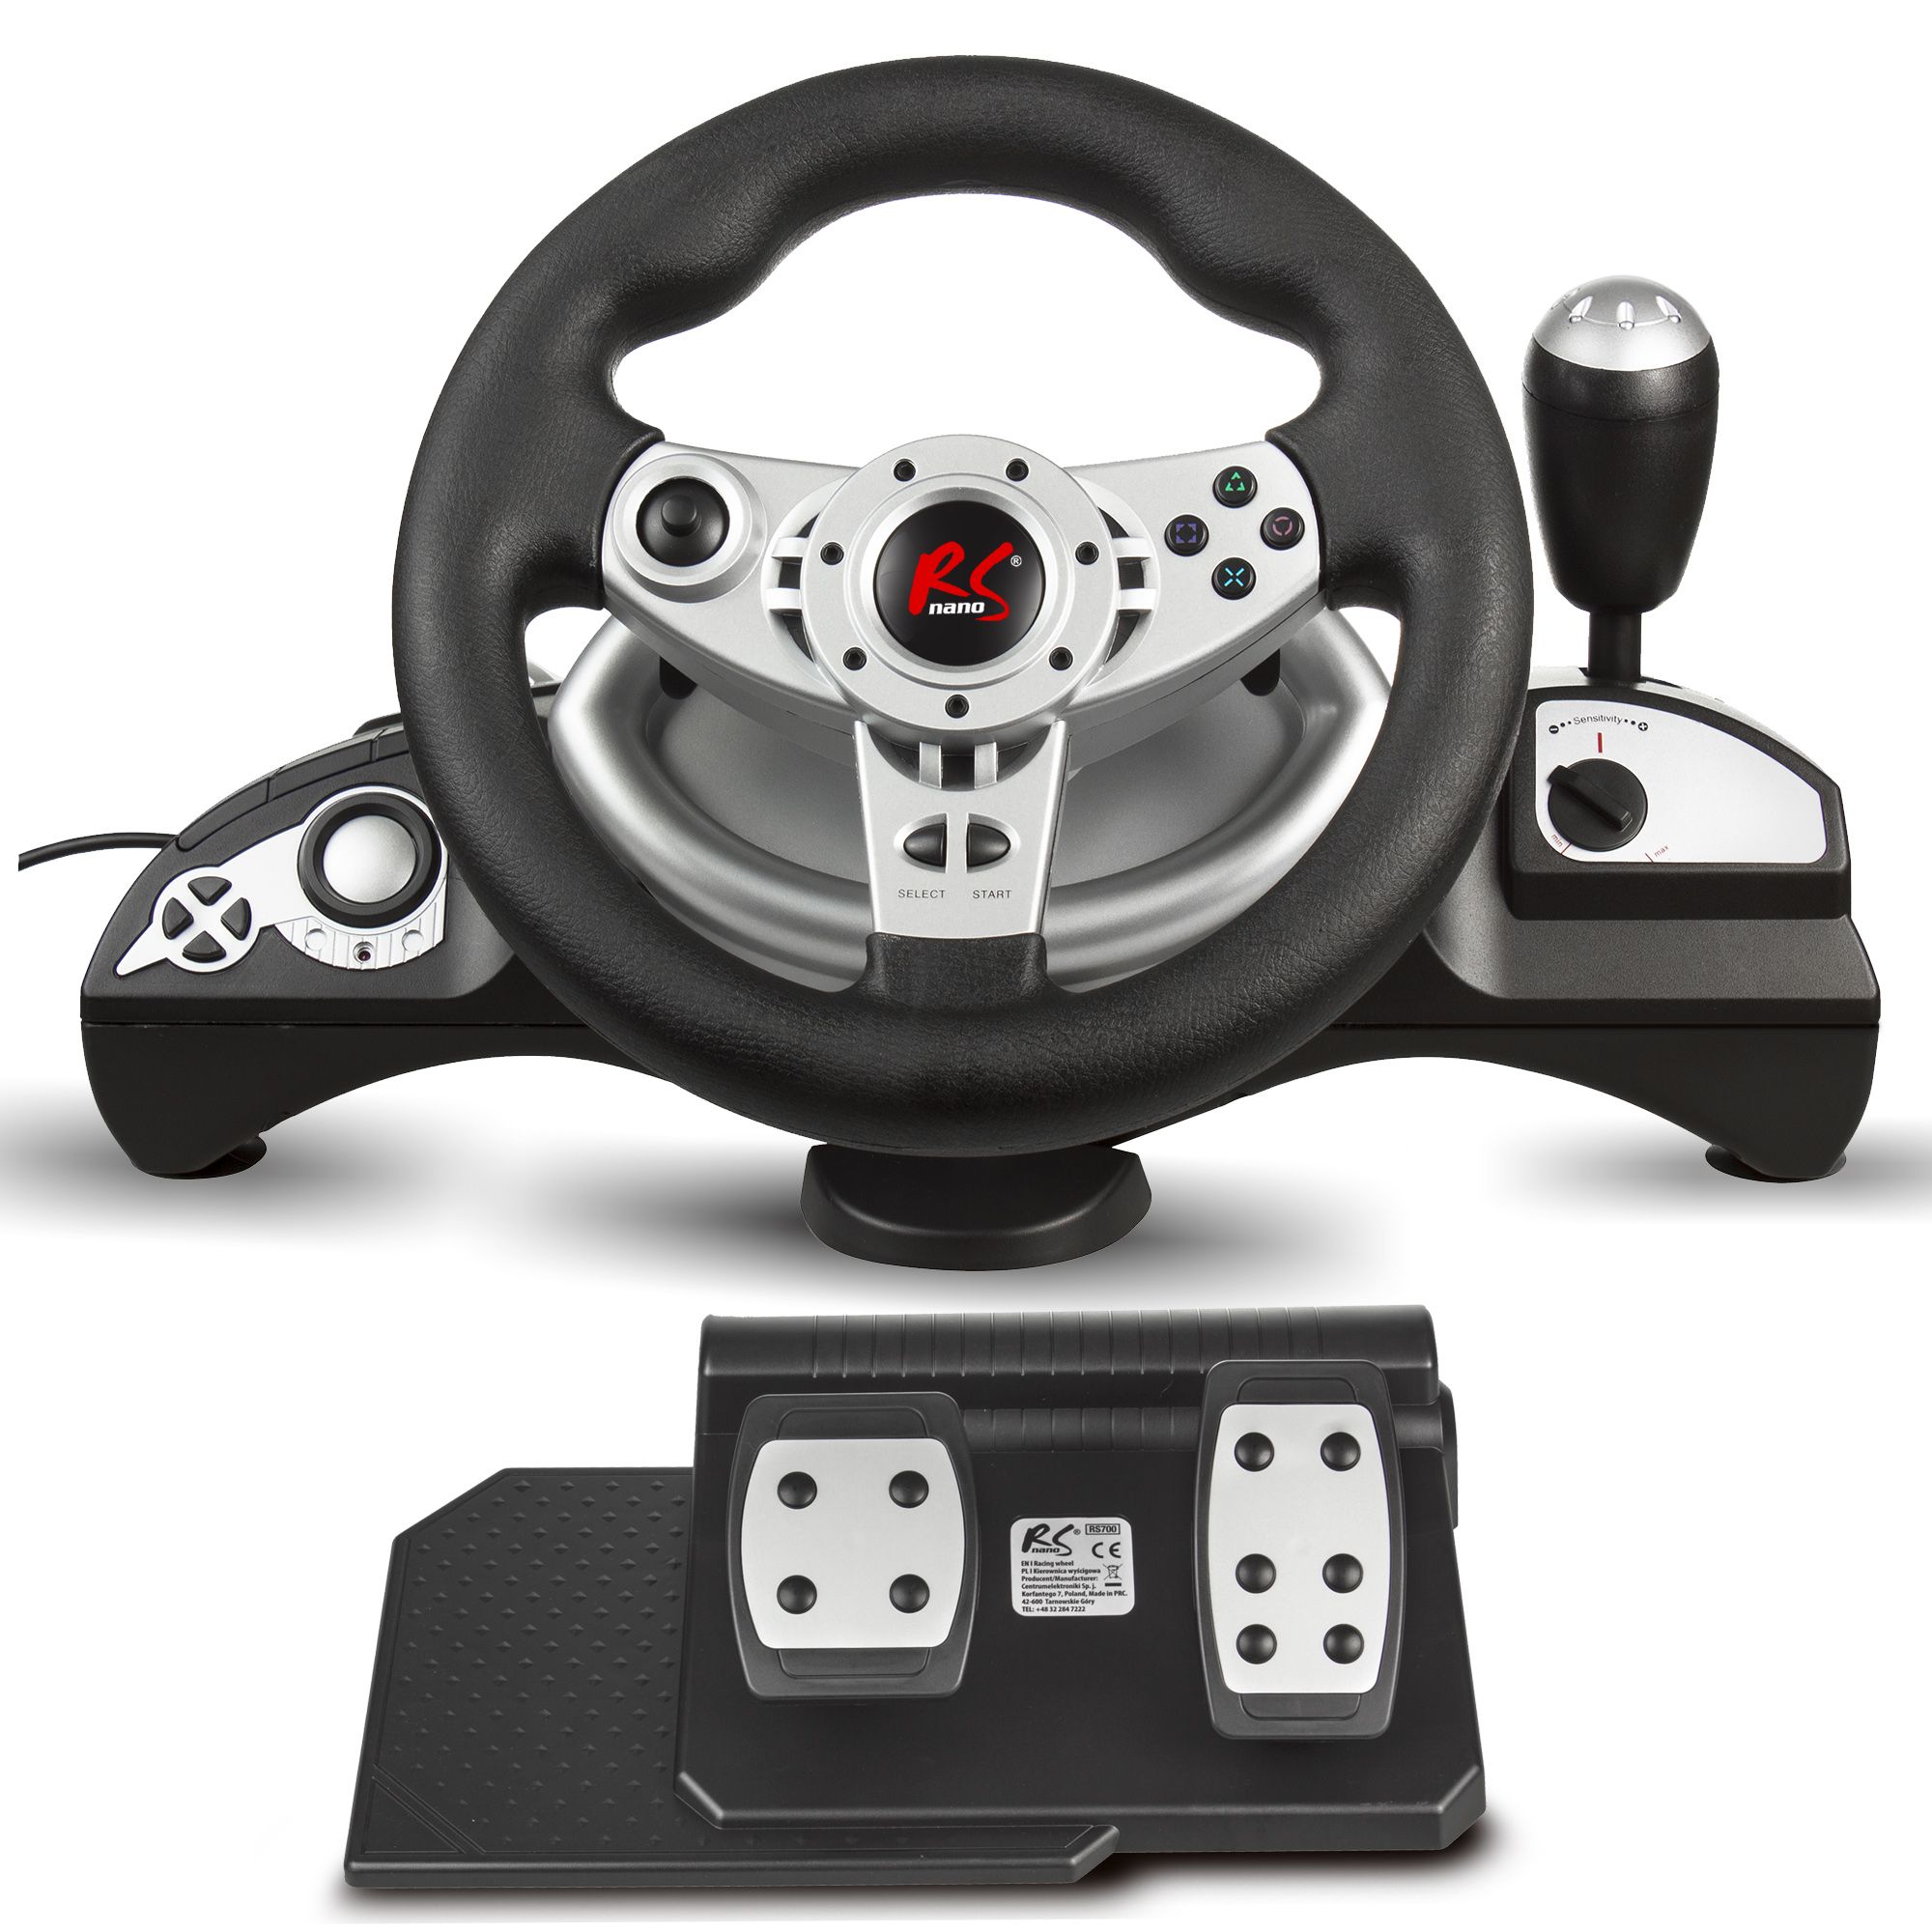 NanoRS RS700 Steering wheel NanoRS, PS4 / PS3 / XBOX ONE / XBOX360 / PC (X-INPUT / D-INPUT) / SWTICH / ANDROID 8IN, RS700_5